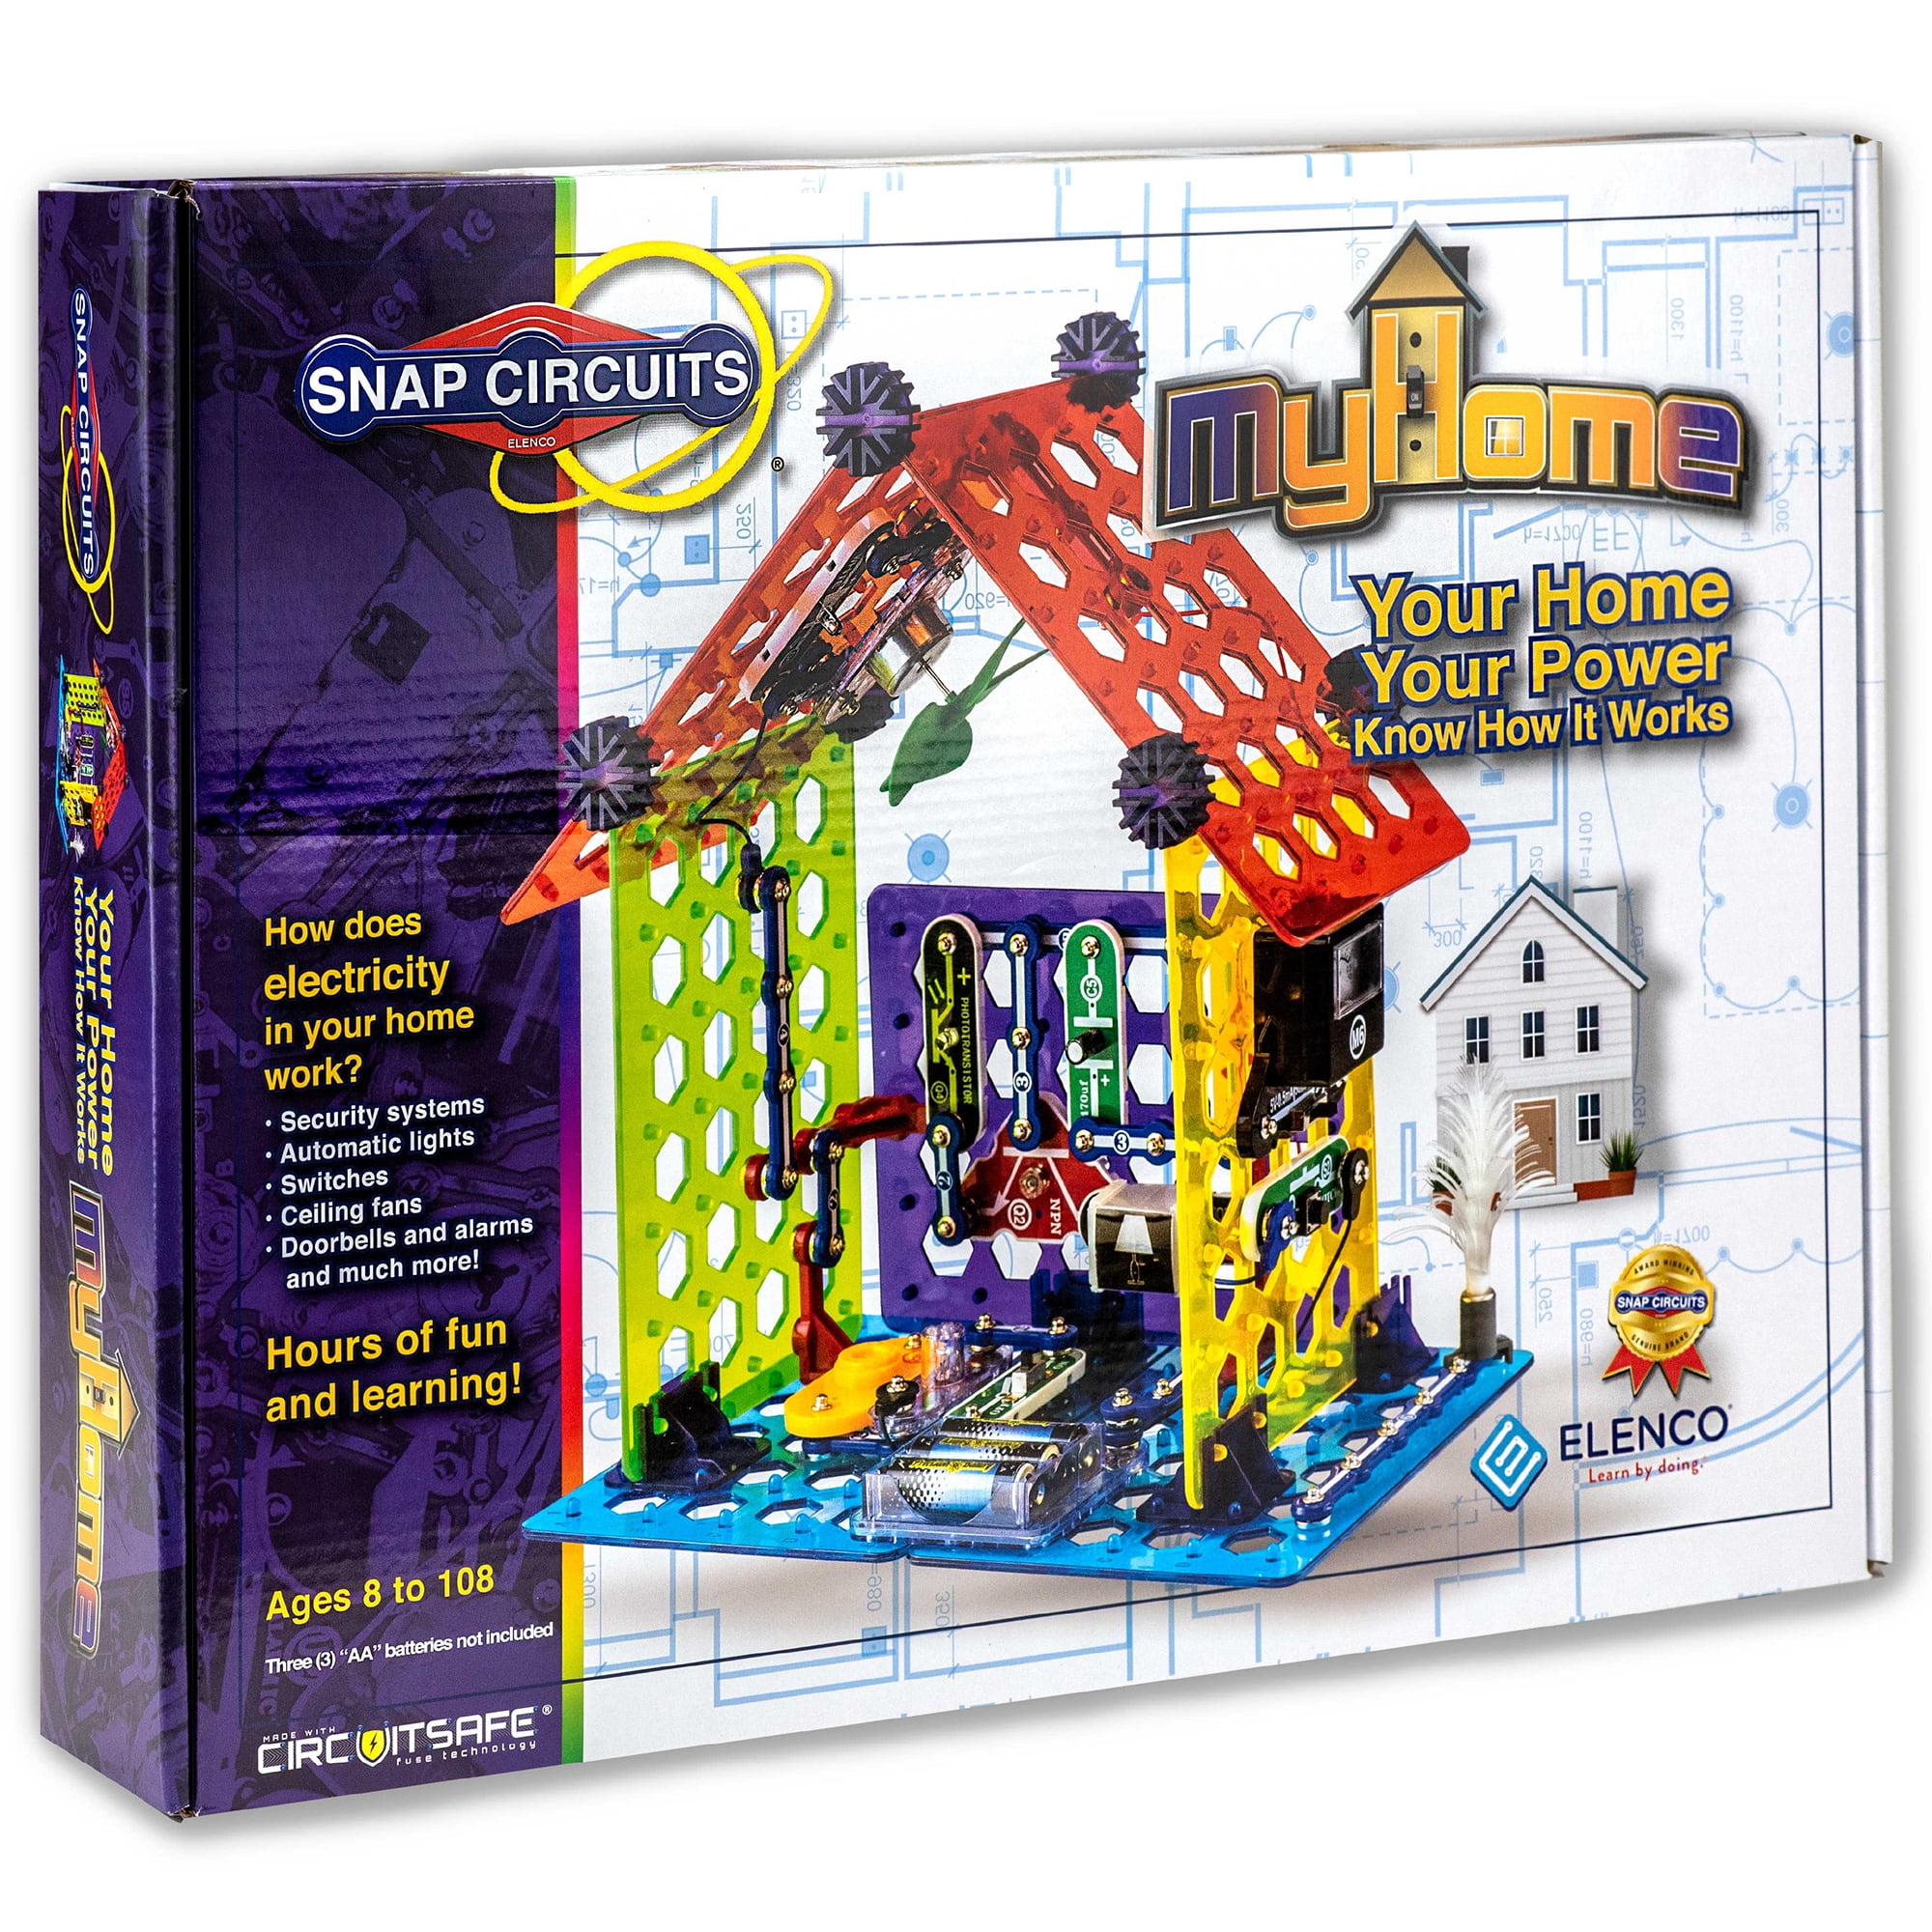 Elenco Snap Circuits REPLACEMENT PARTS You Choose Which Pieces You Need  UNTESTED